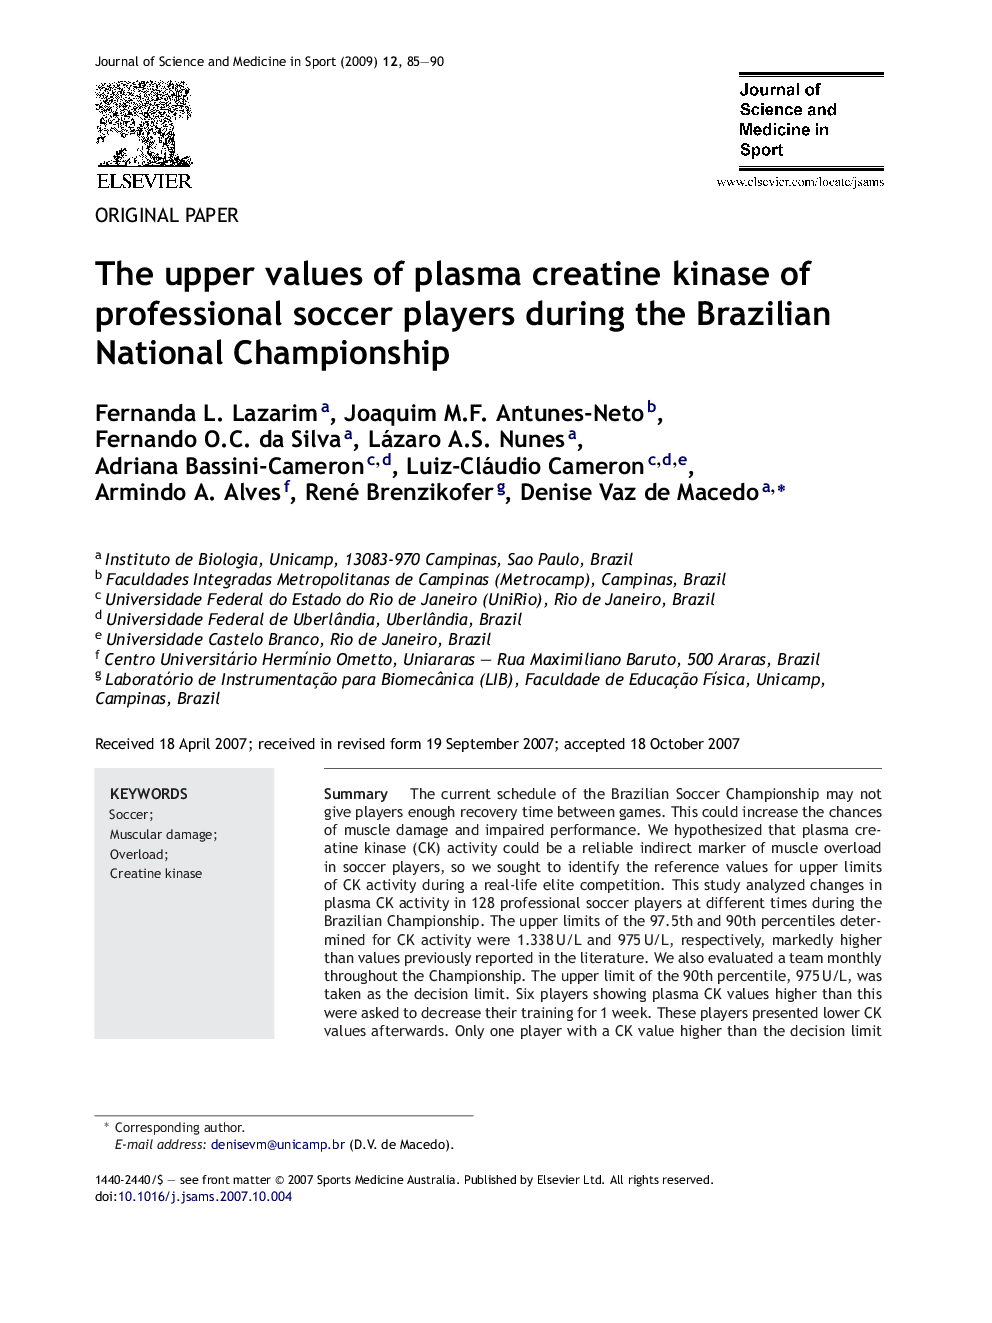 The upper values of plasma creatine kinase of professional soccer players during the Brazilian National Championship